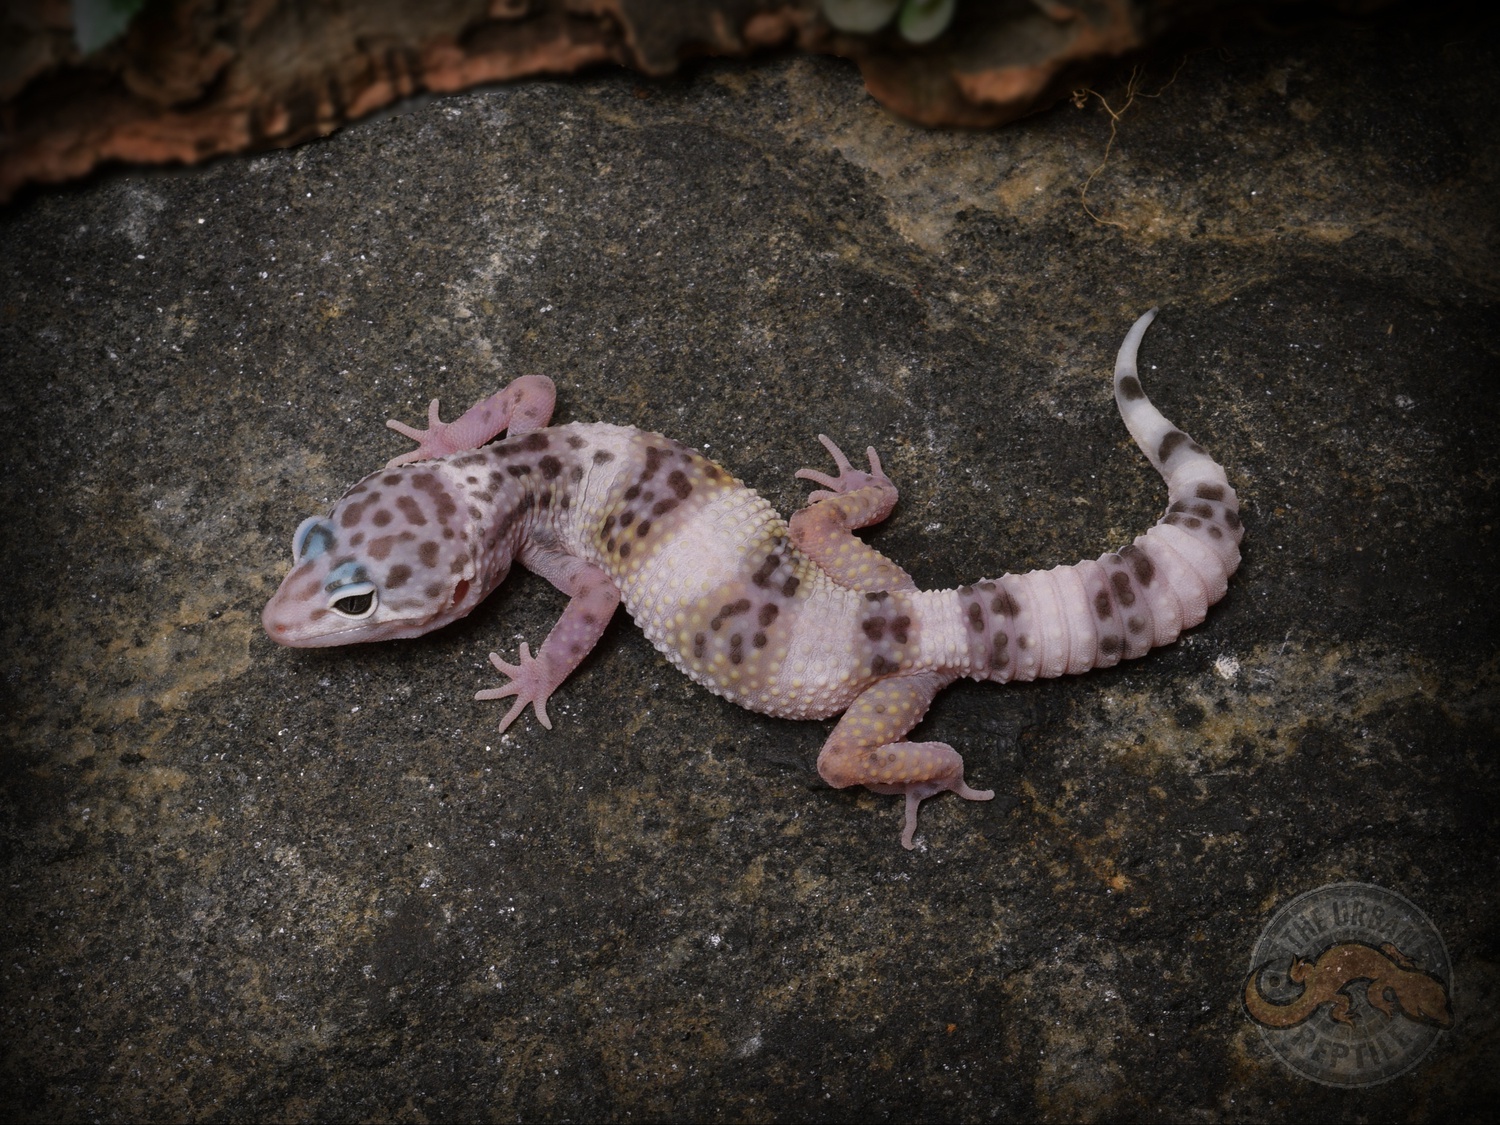 TUG Snow Leopard Gecko by The Urban Reptile